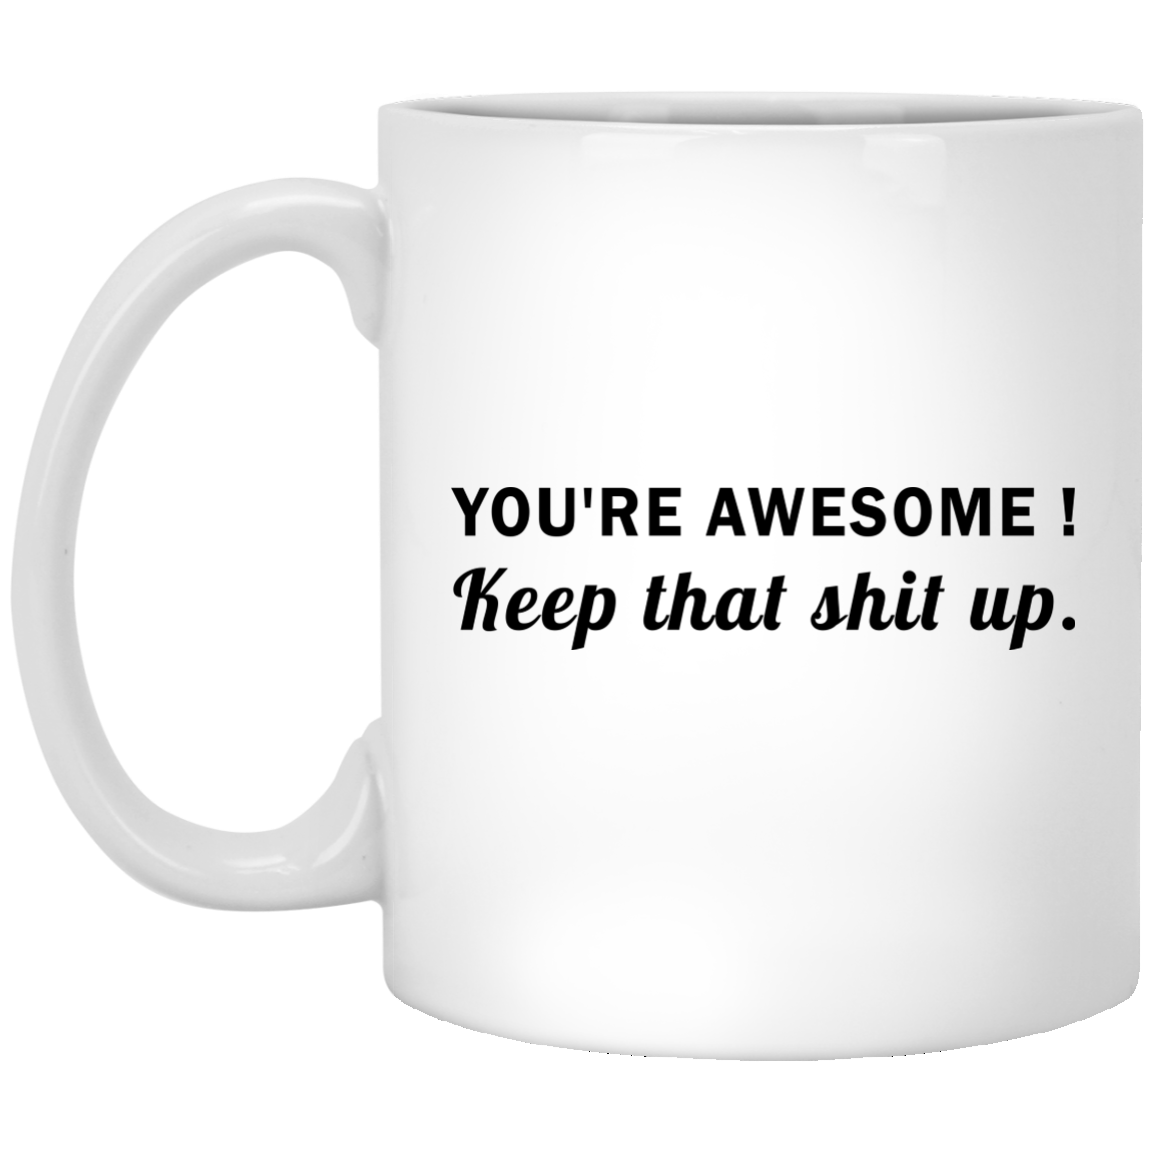 You're Awesome Keep That Shit Up Mugs